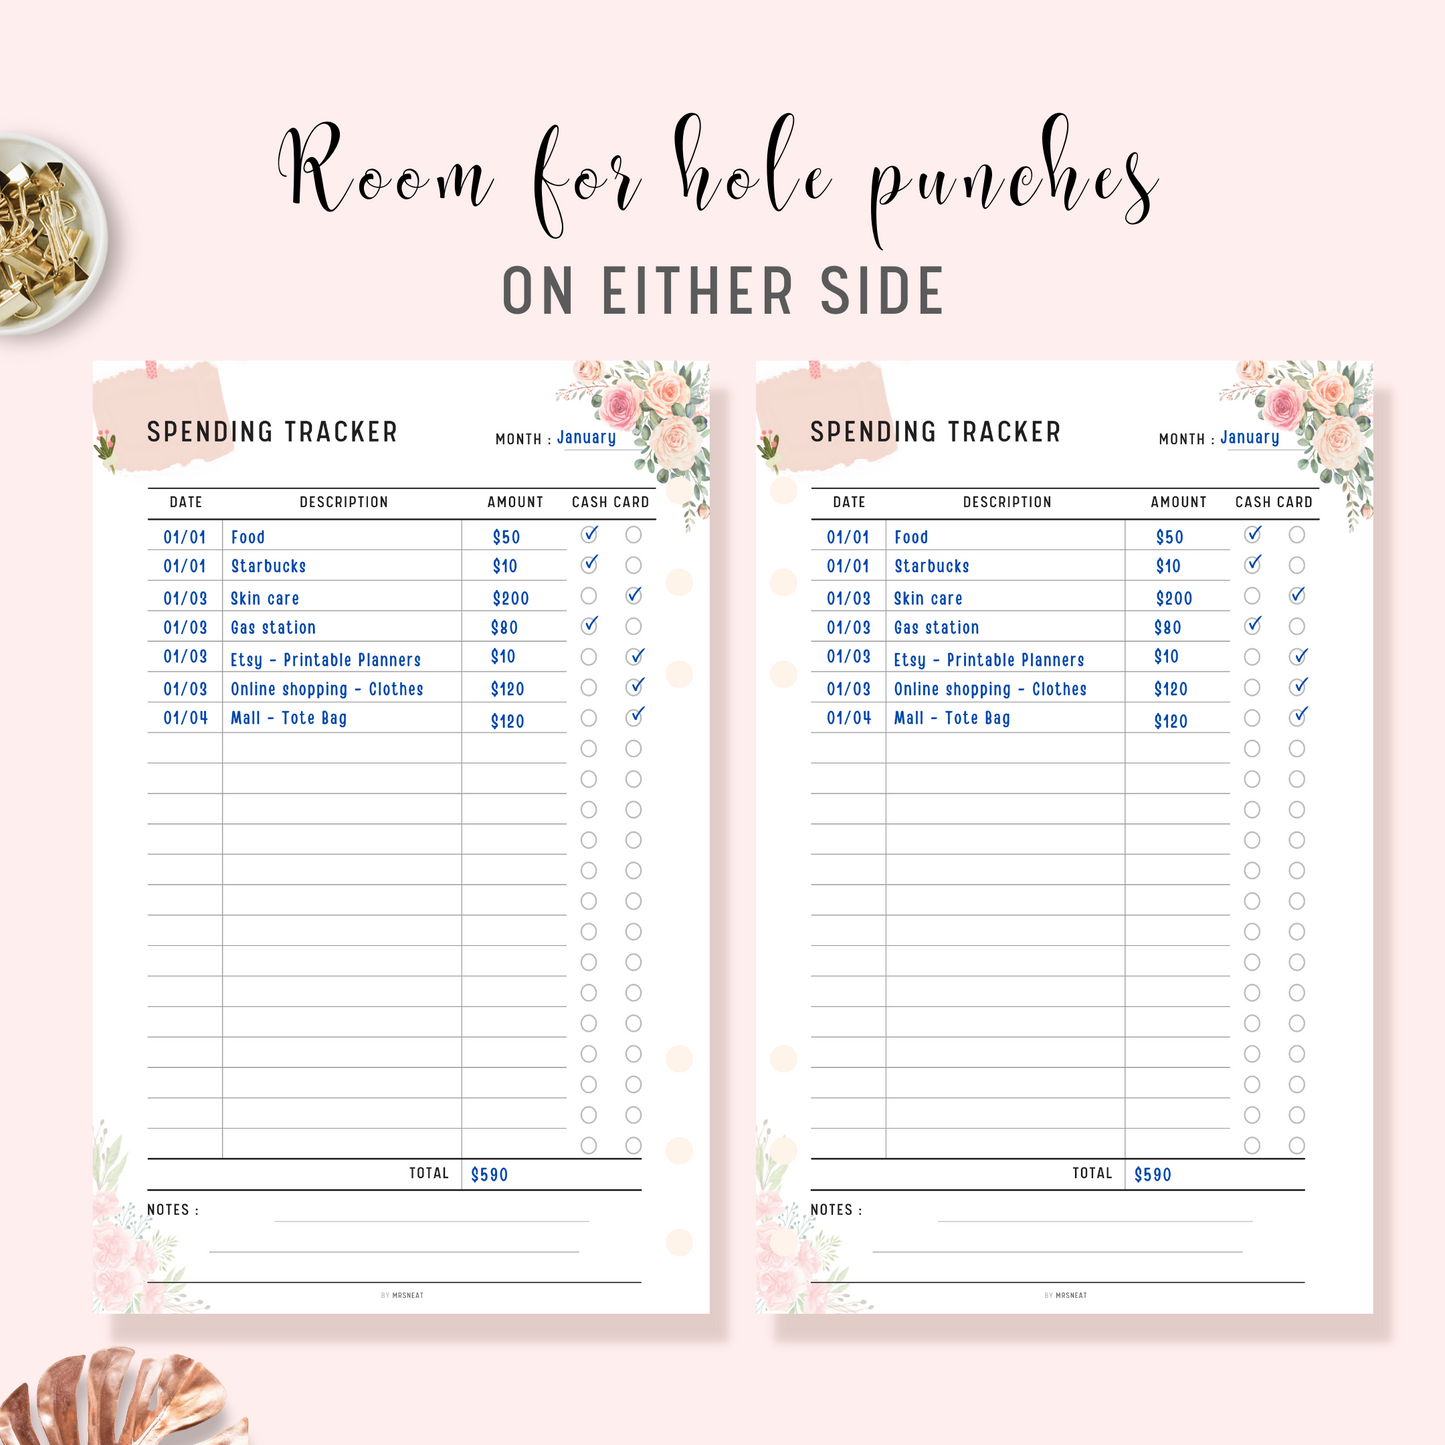 Floral Spending Tracker Printable Planner with room for hole punches on either side